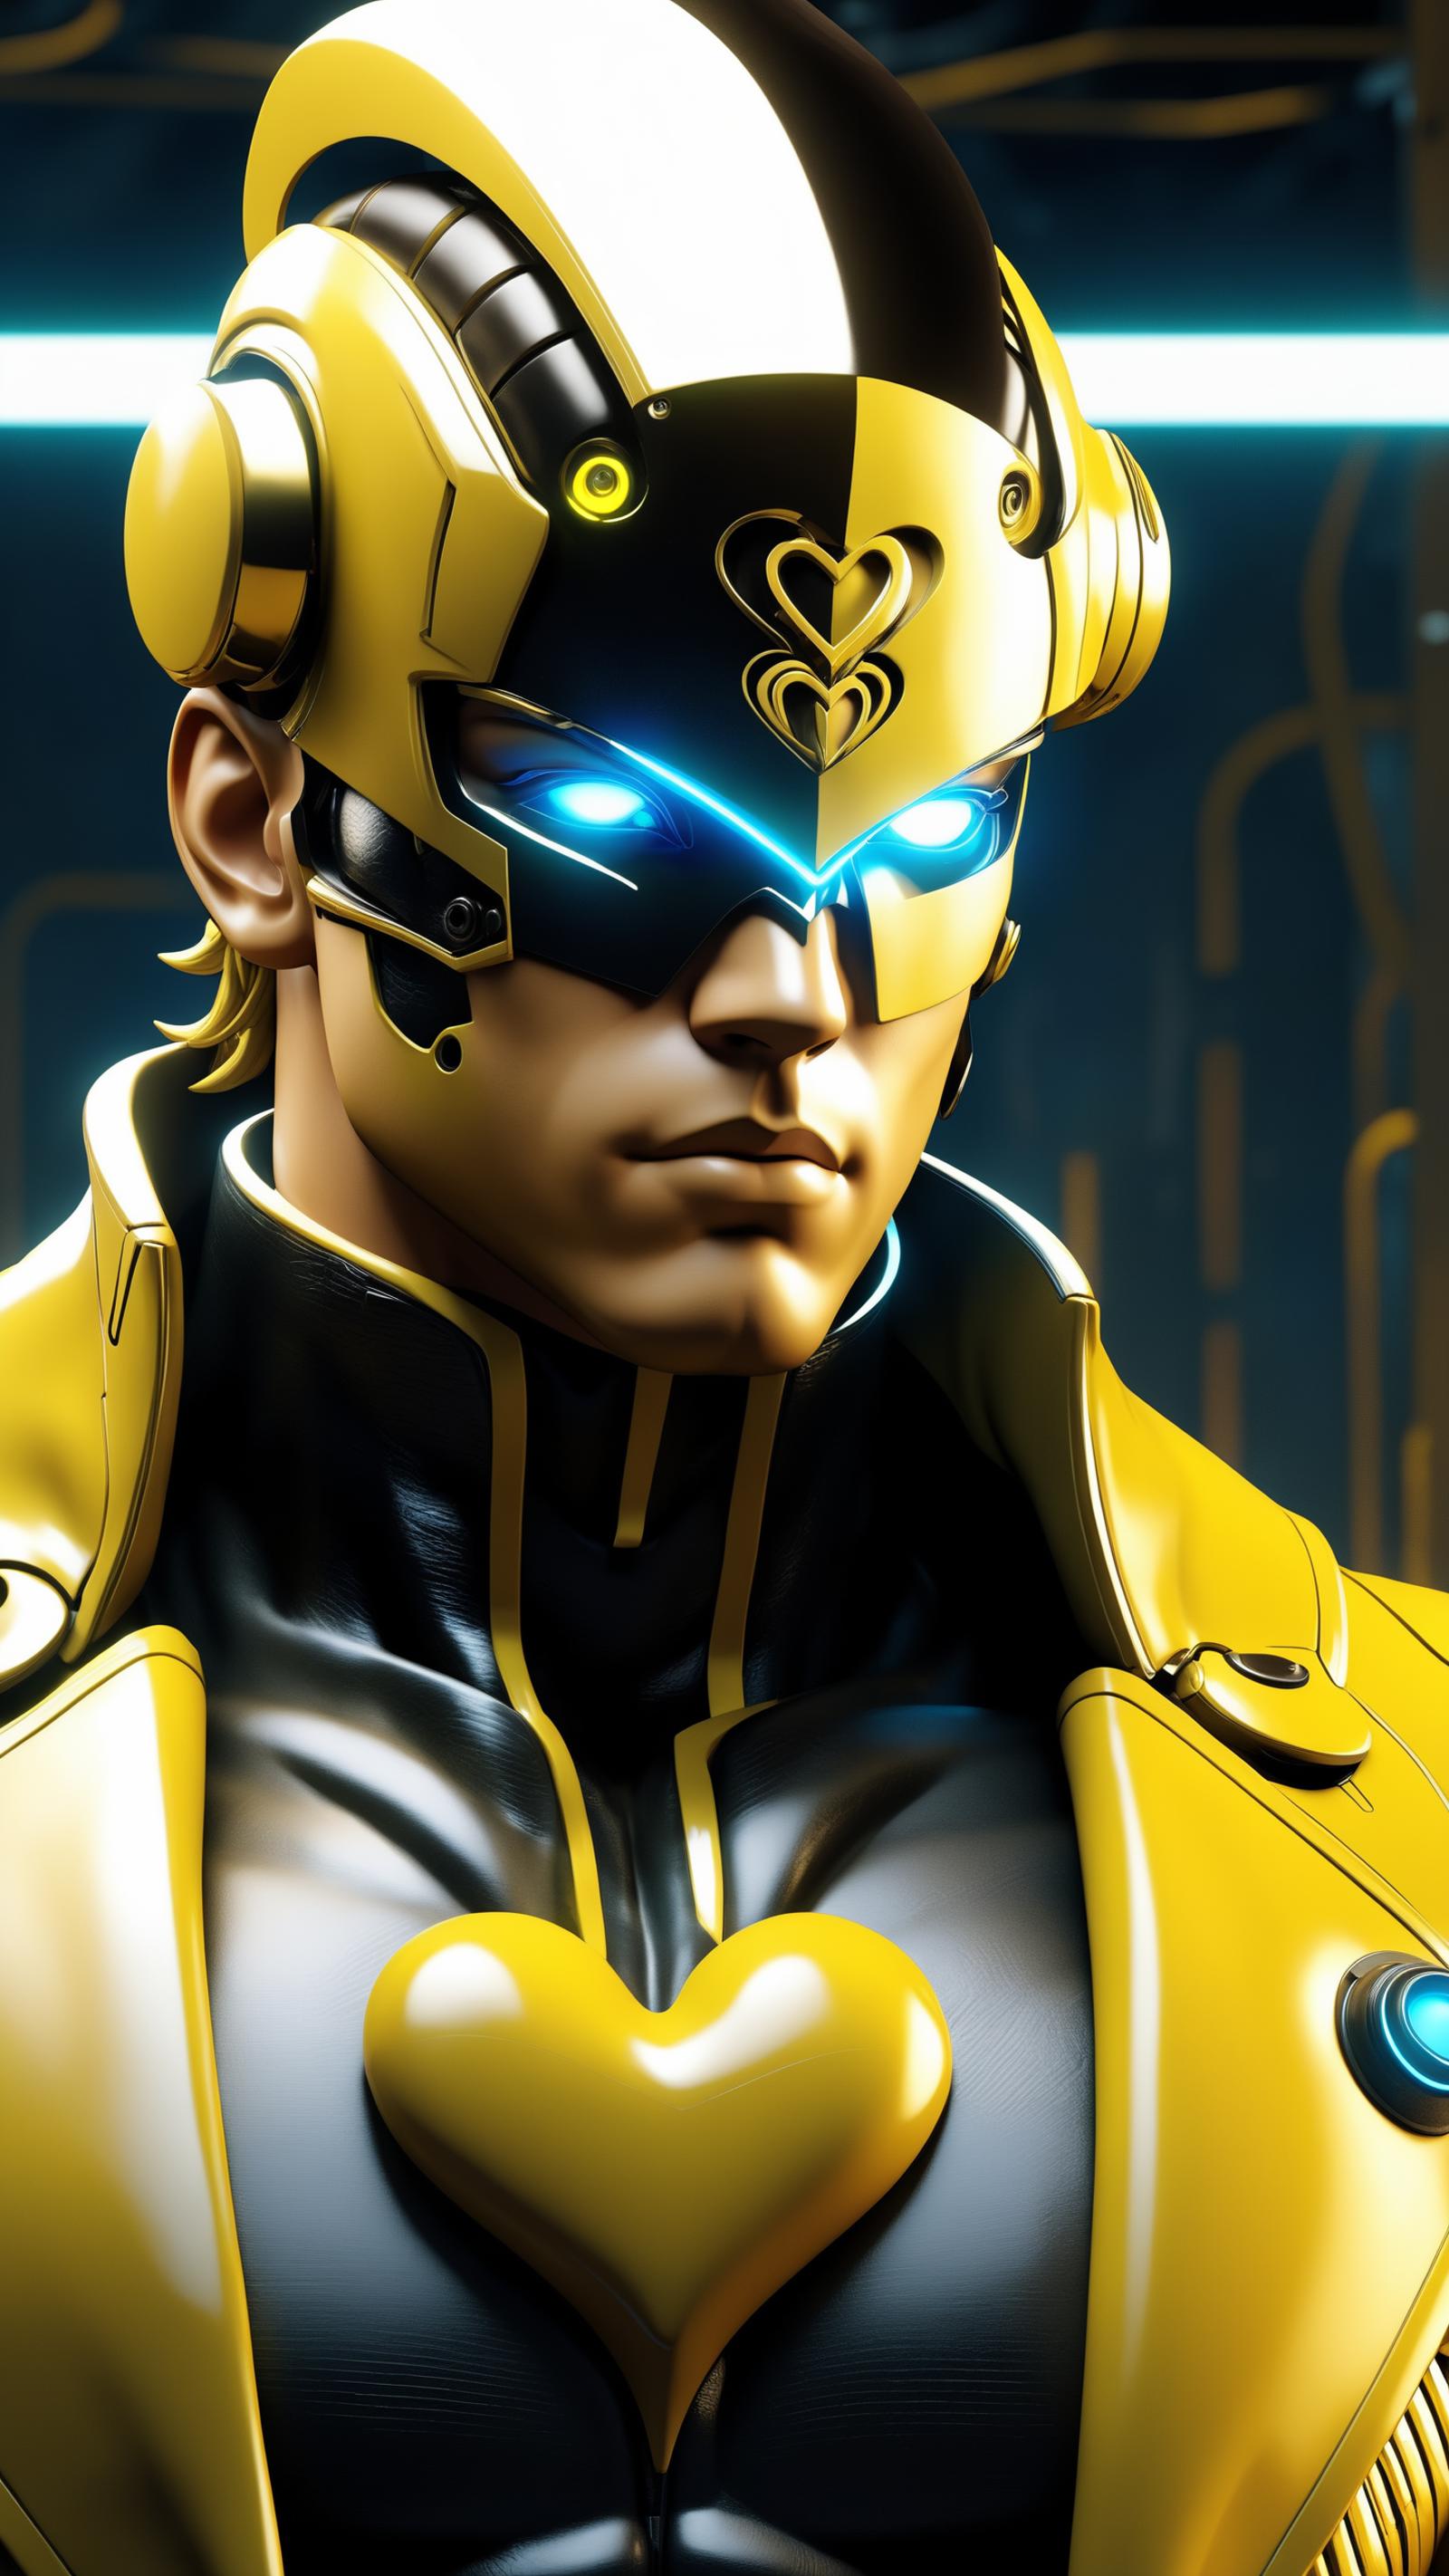 A Character with a Yellow Suit and Blue Eyes.